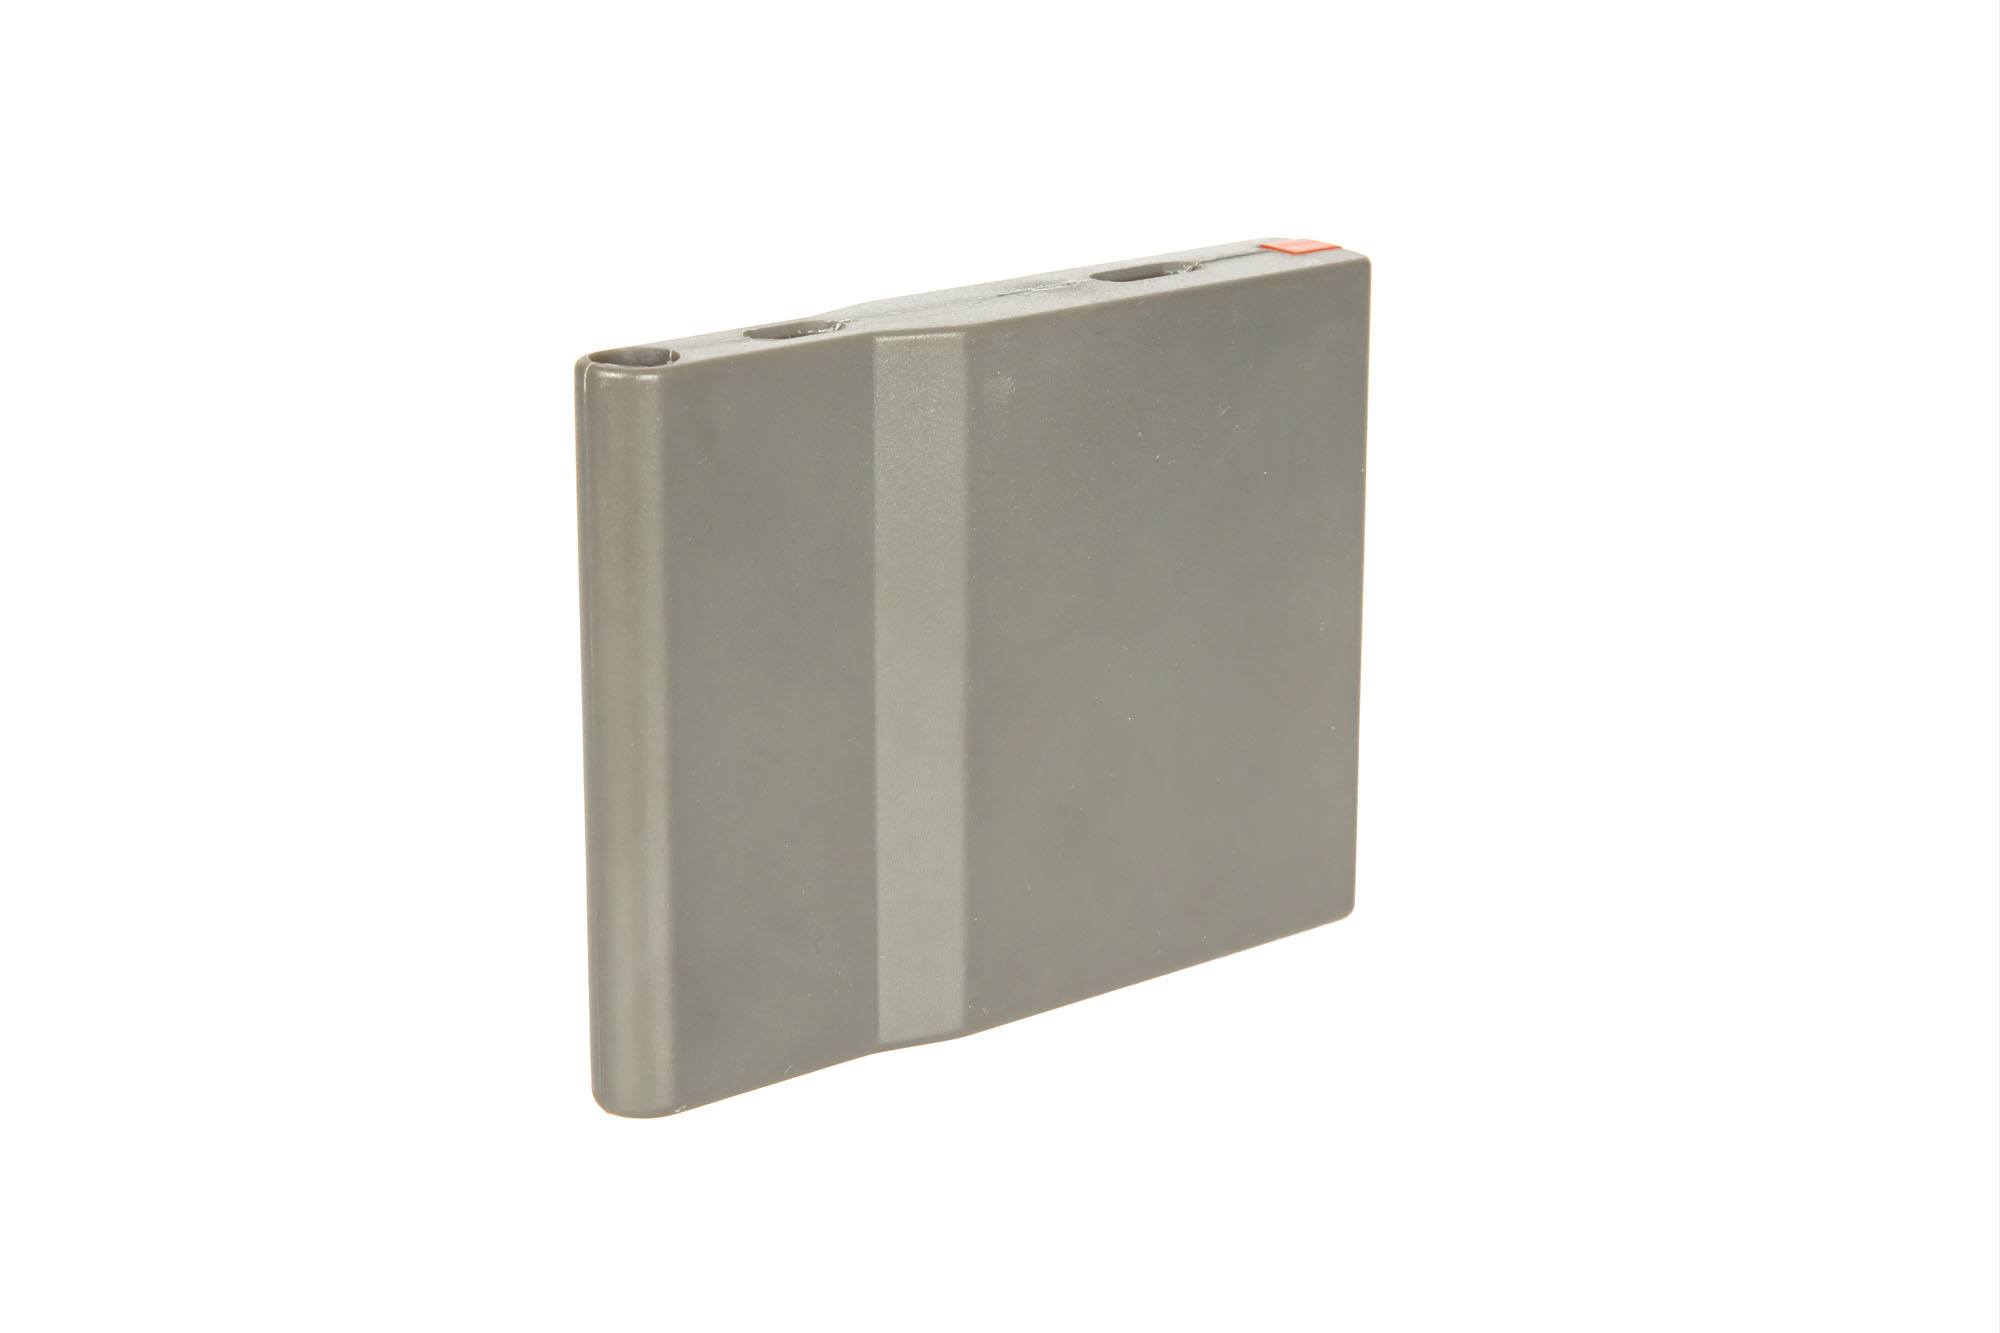 25 BB Polymer Magazine for SRS Replicas - Olive Drab